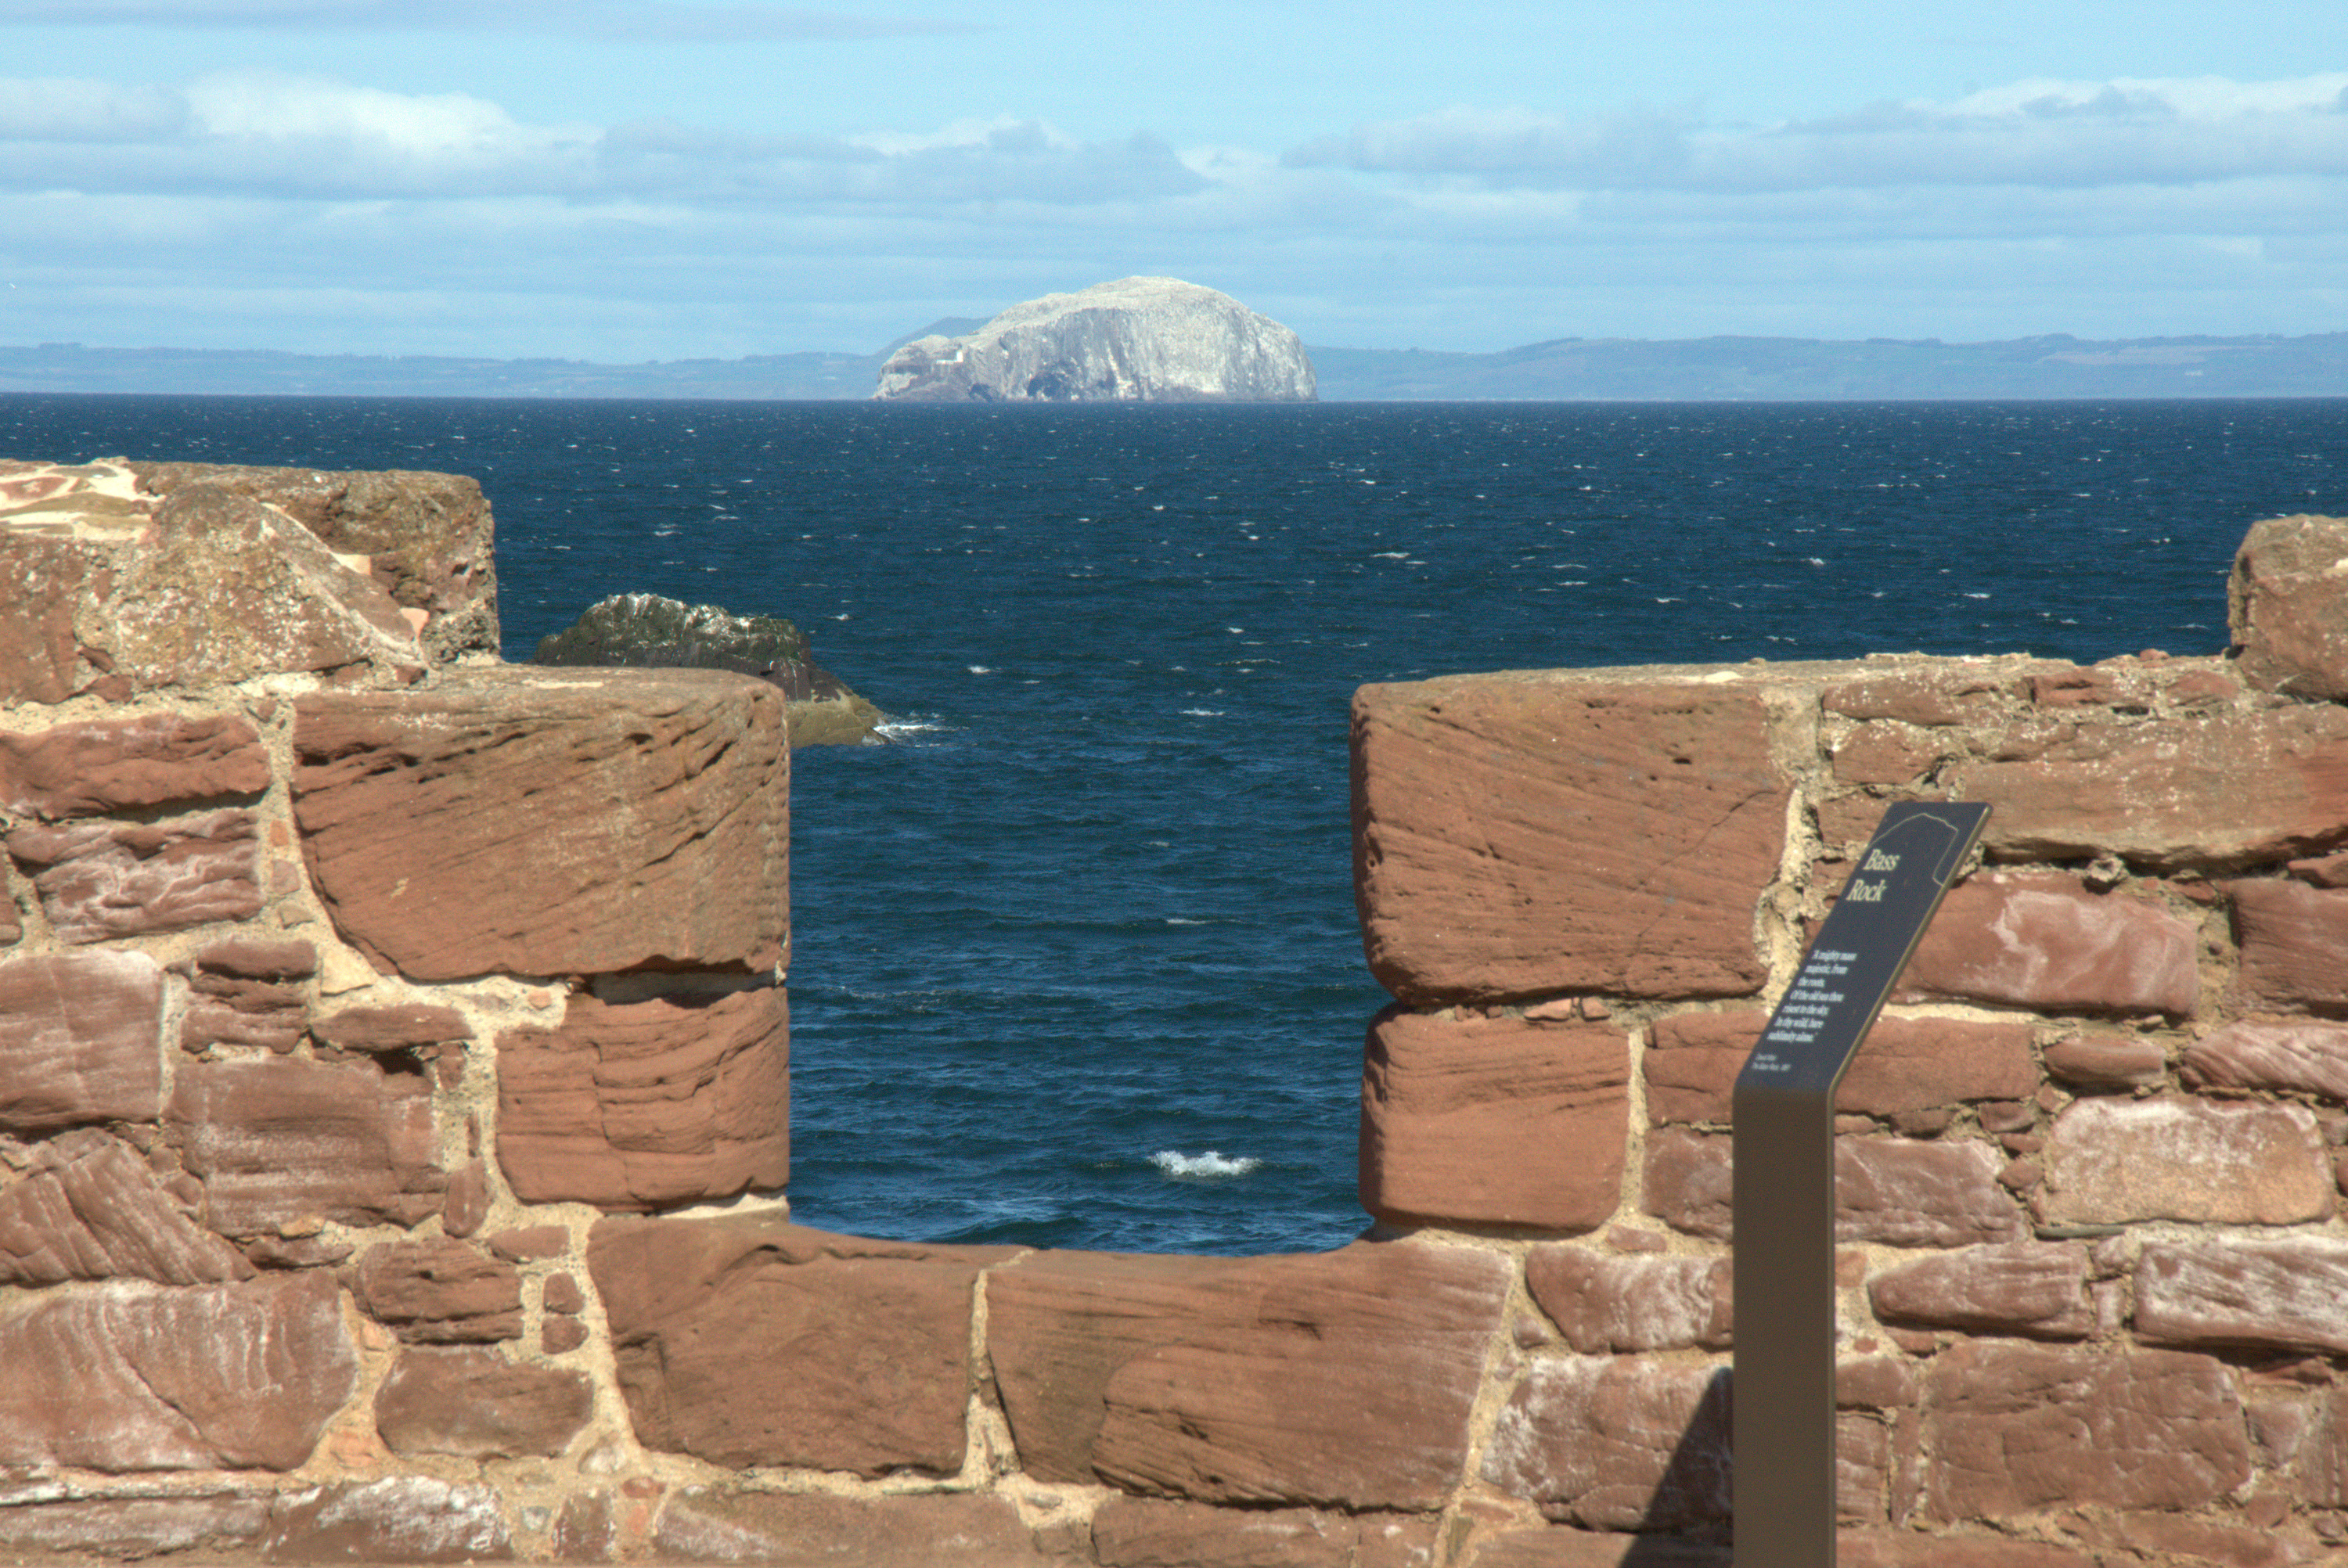 The Bass Rock looms large